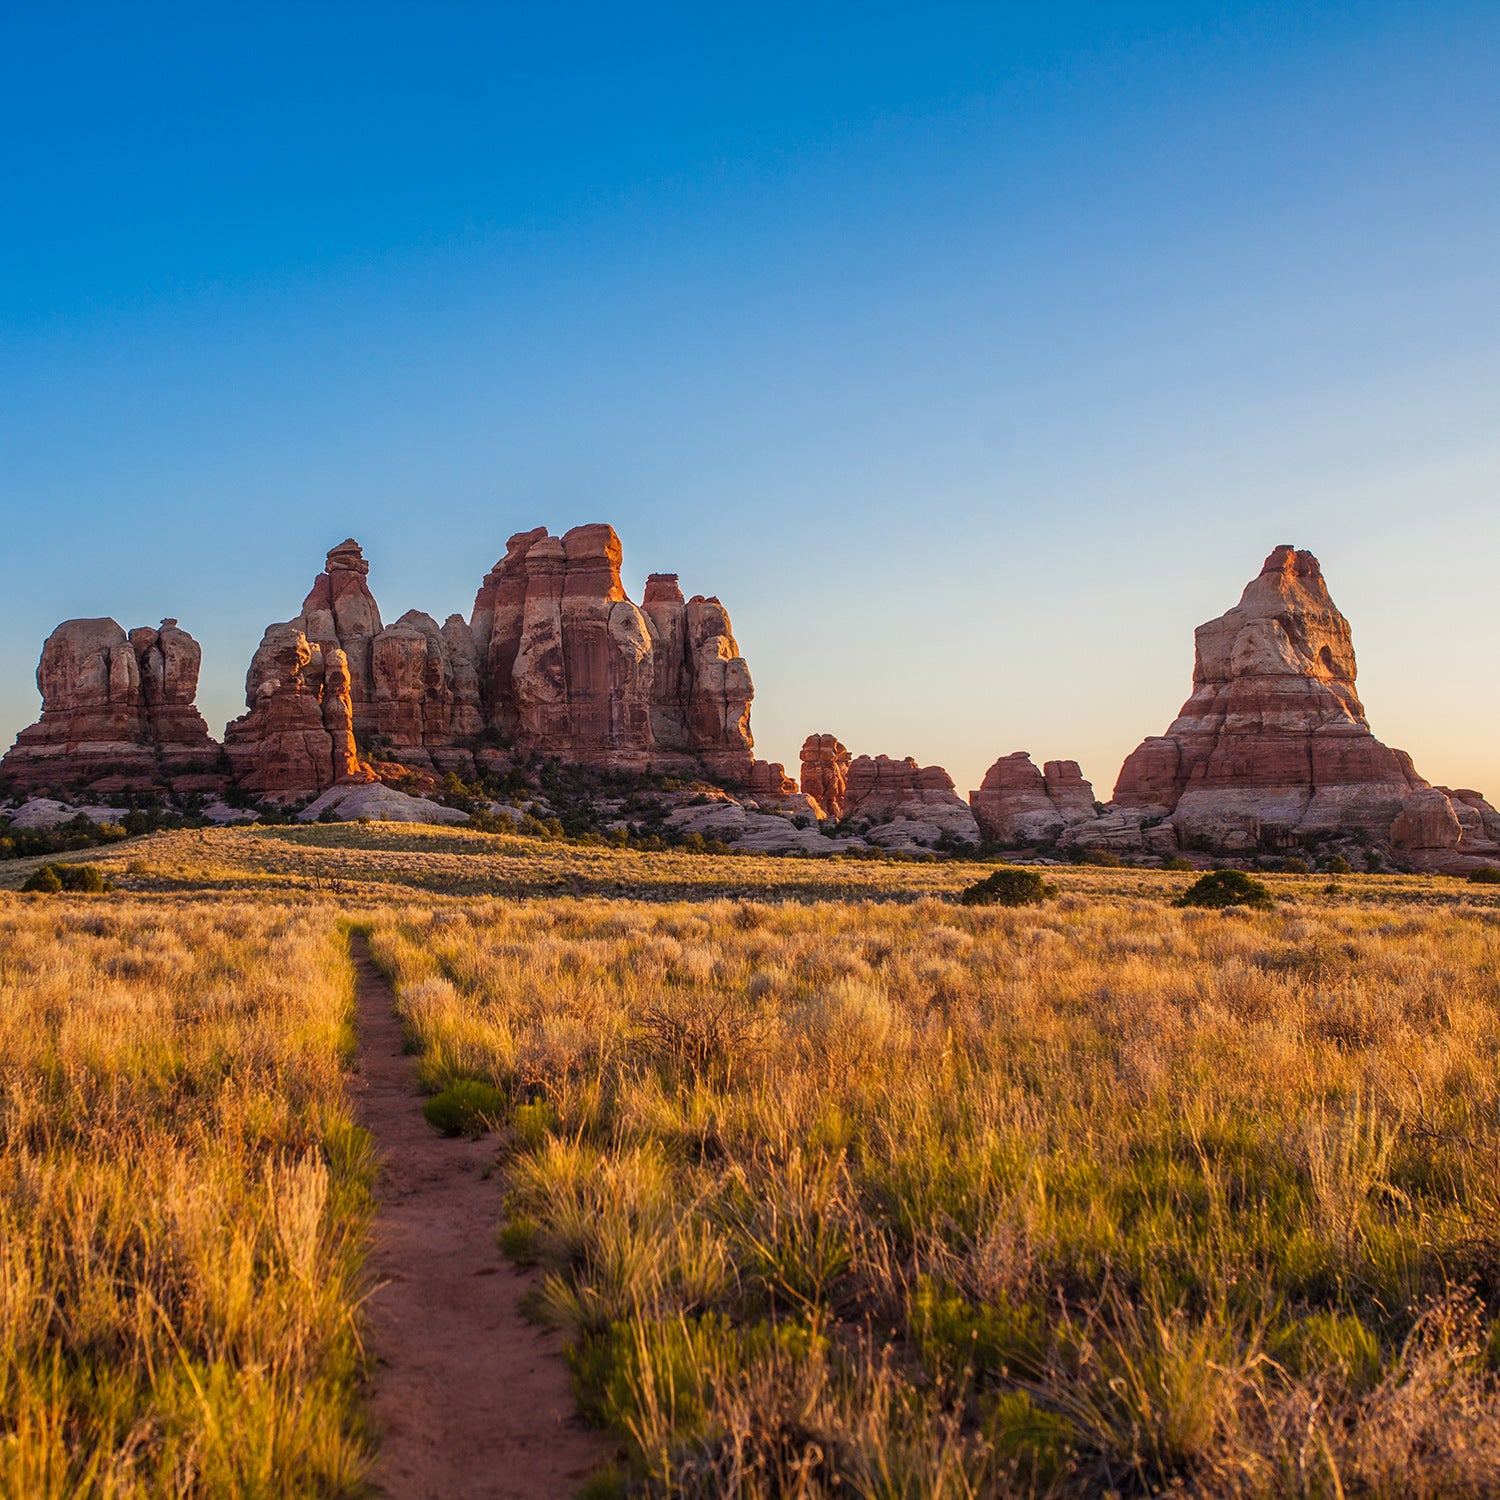 Trail into the needle formations at Chesler Park, Needles District, Canyonlands National Park